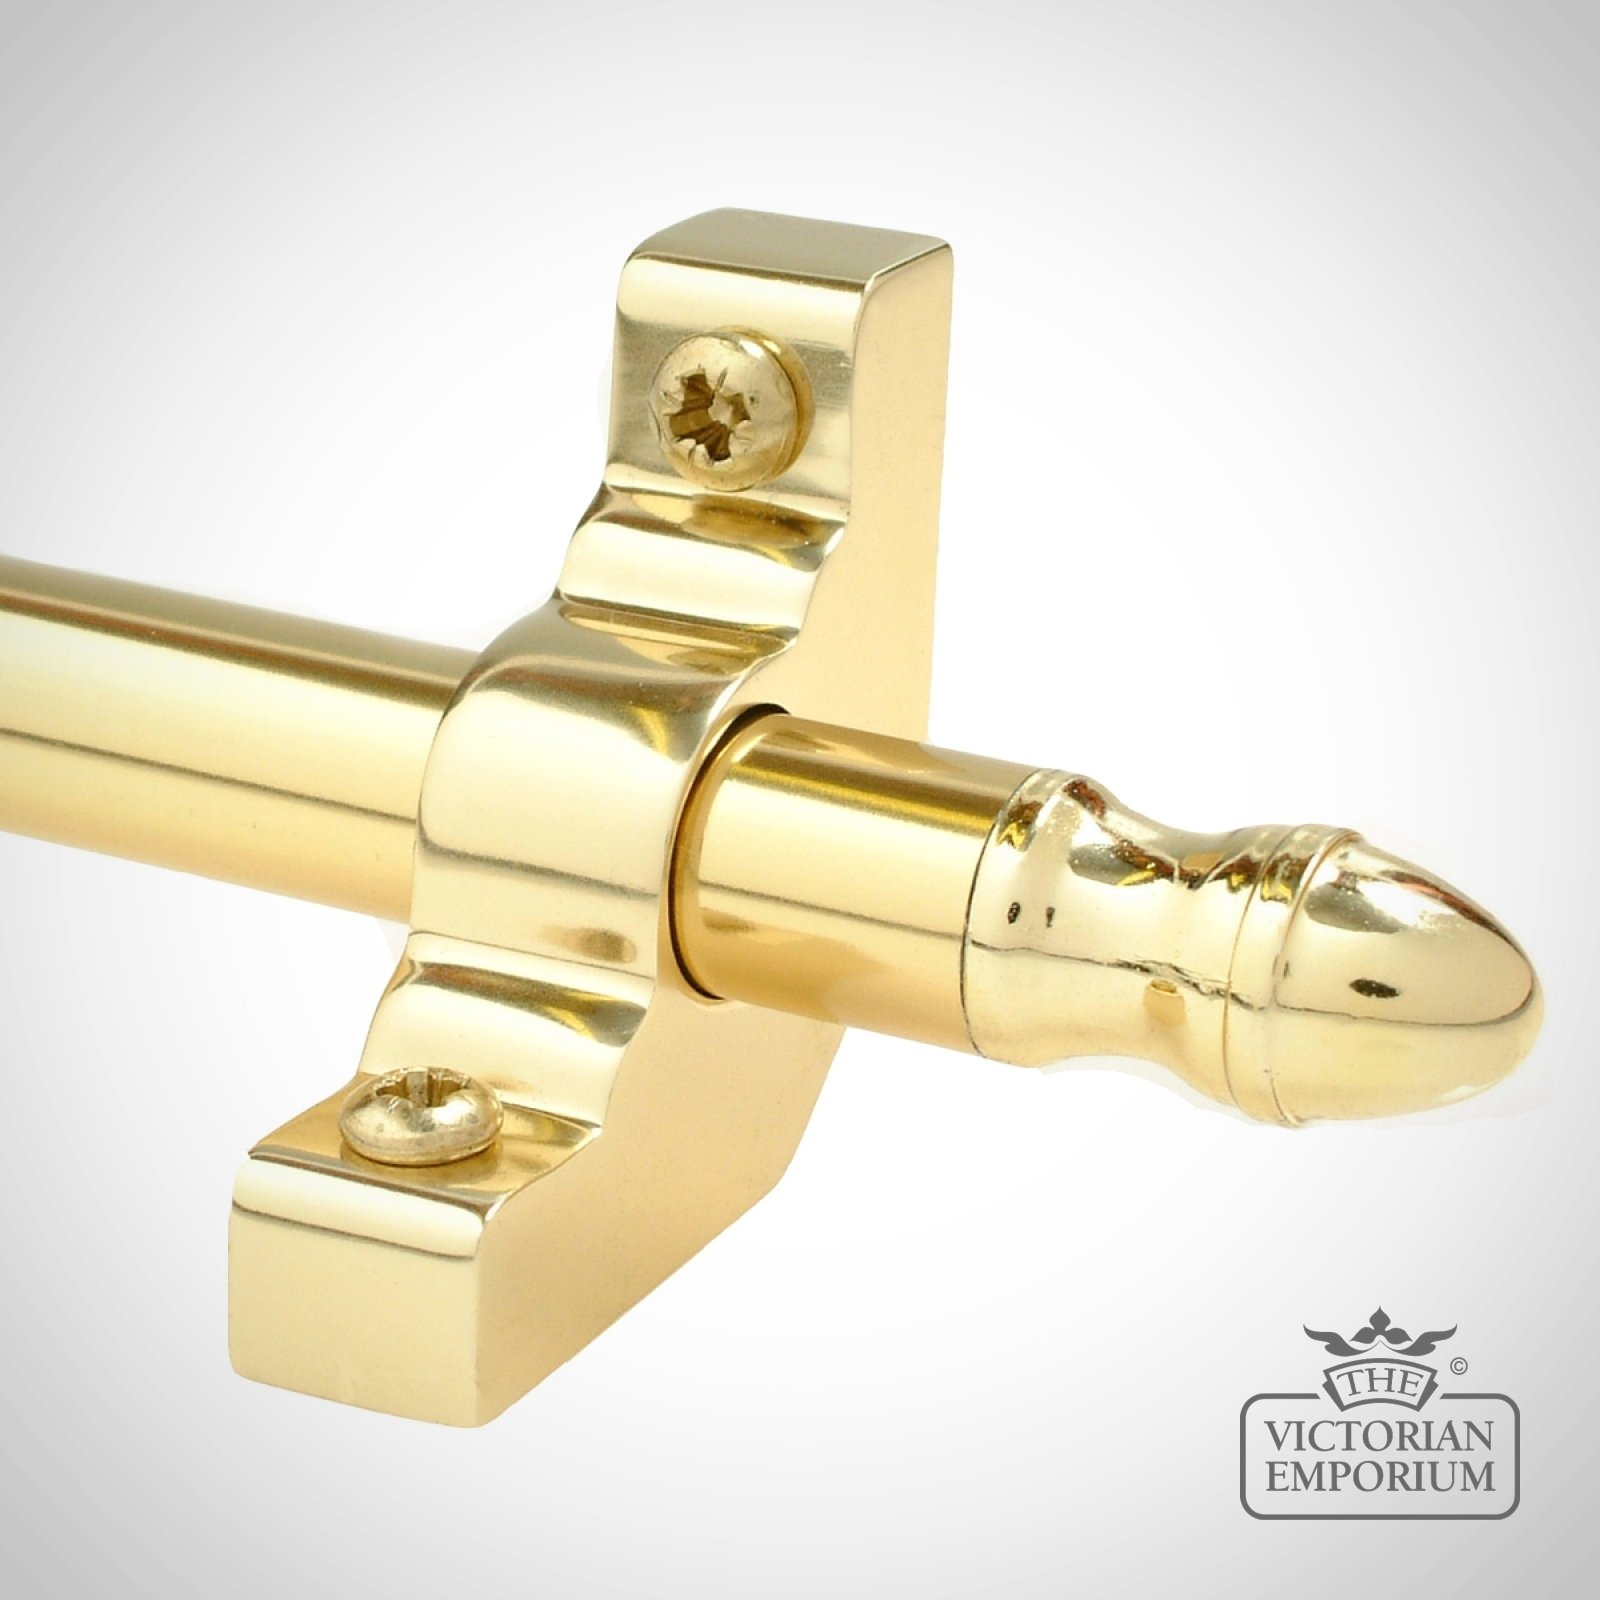 Basic Stair Rod with Acorn Finial